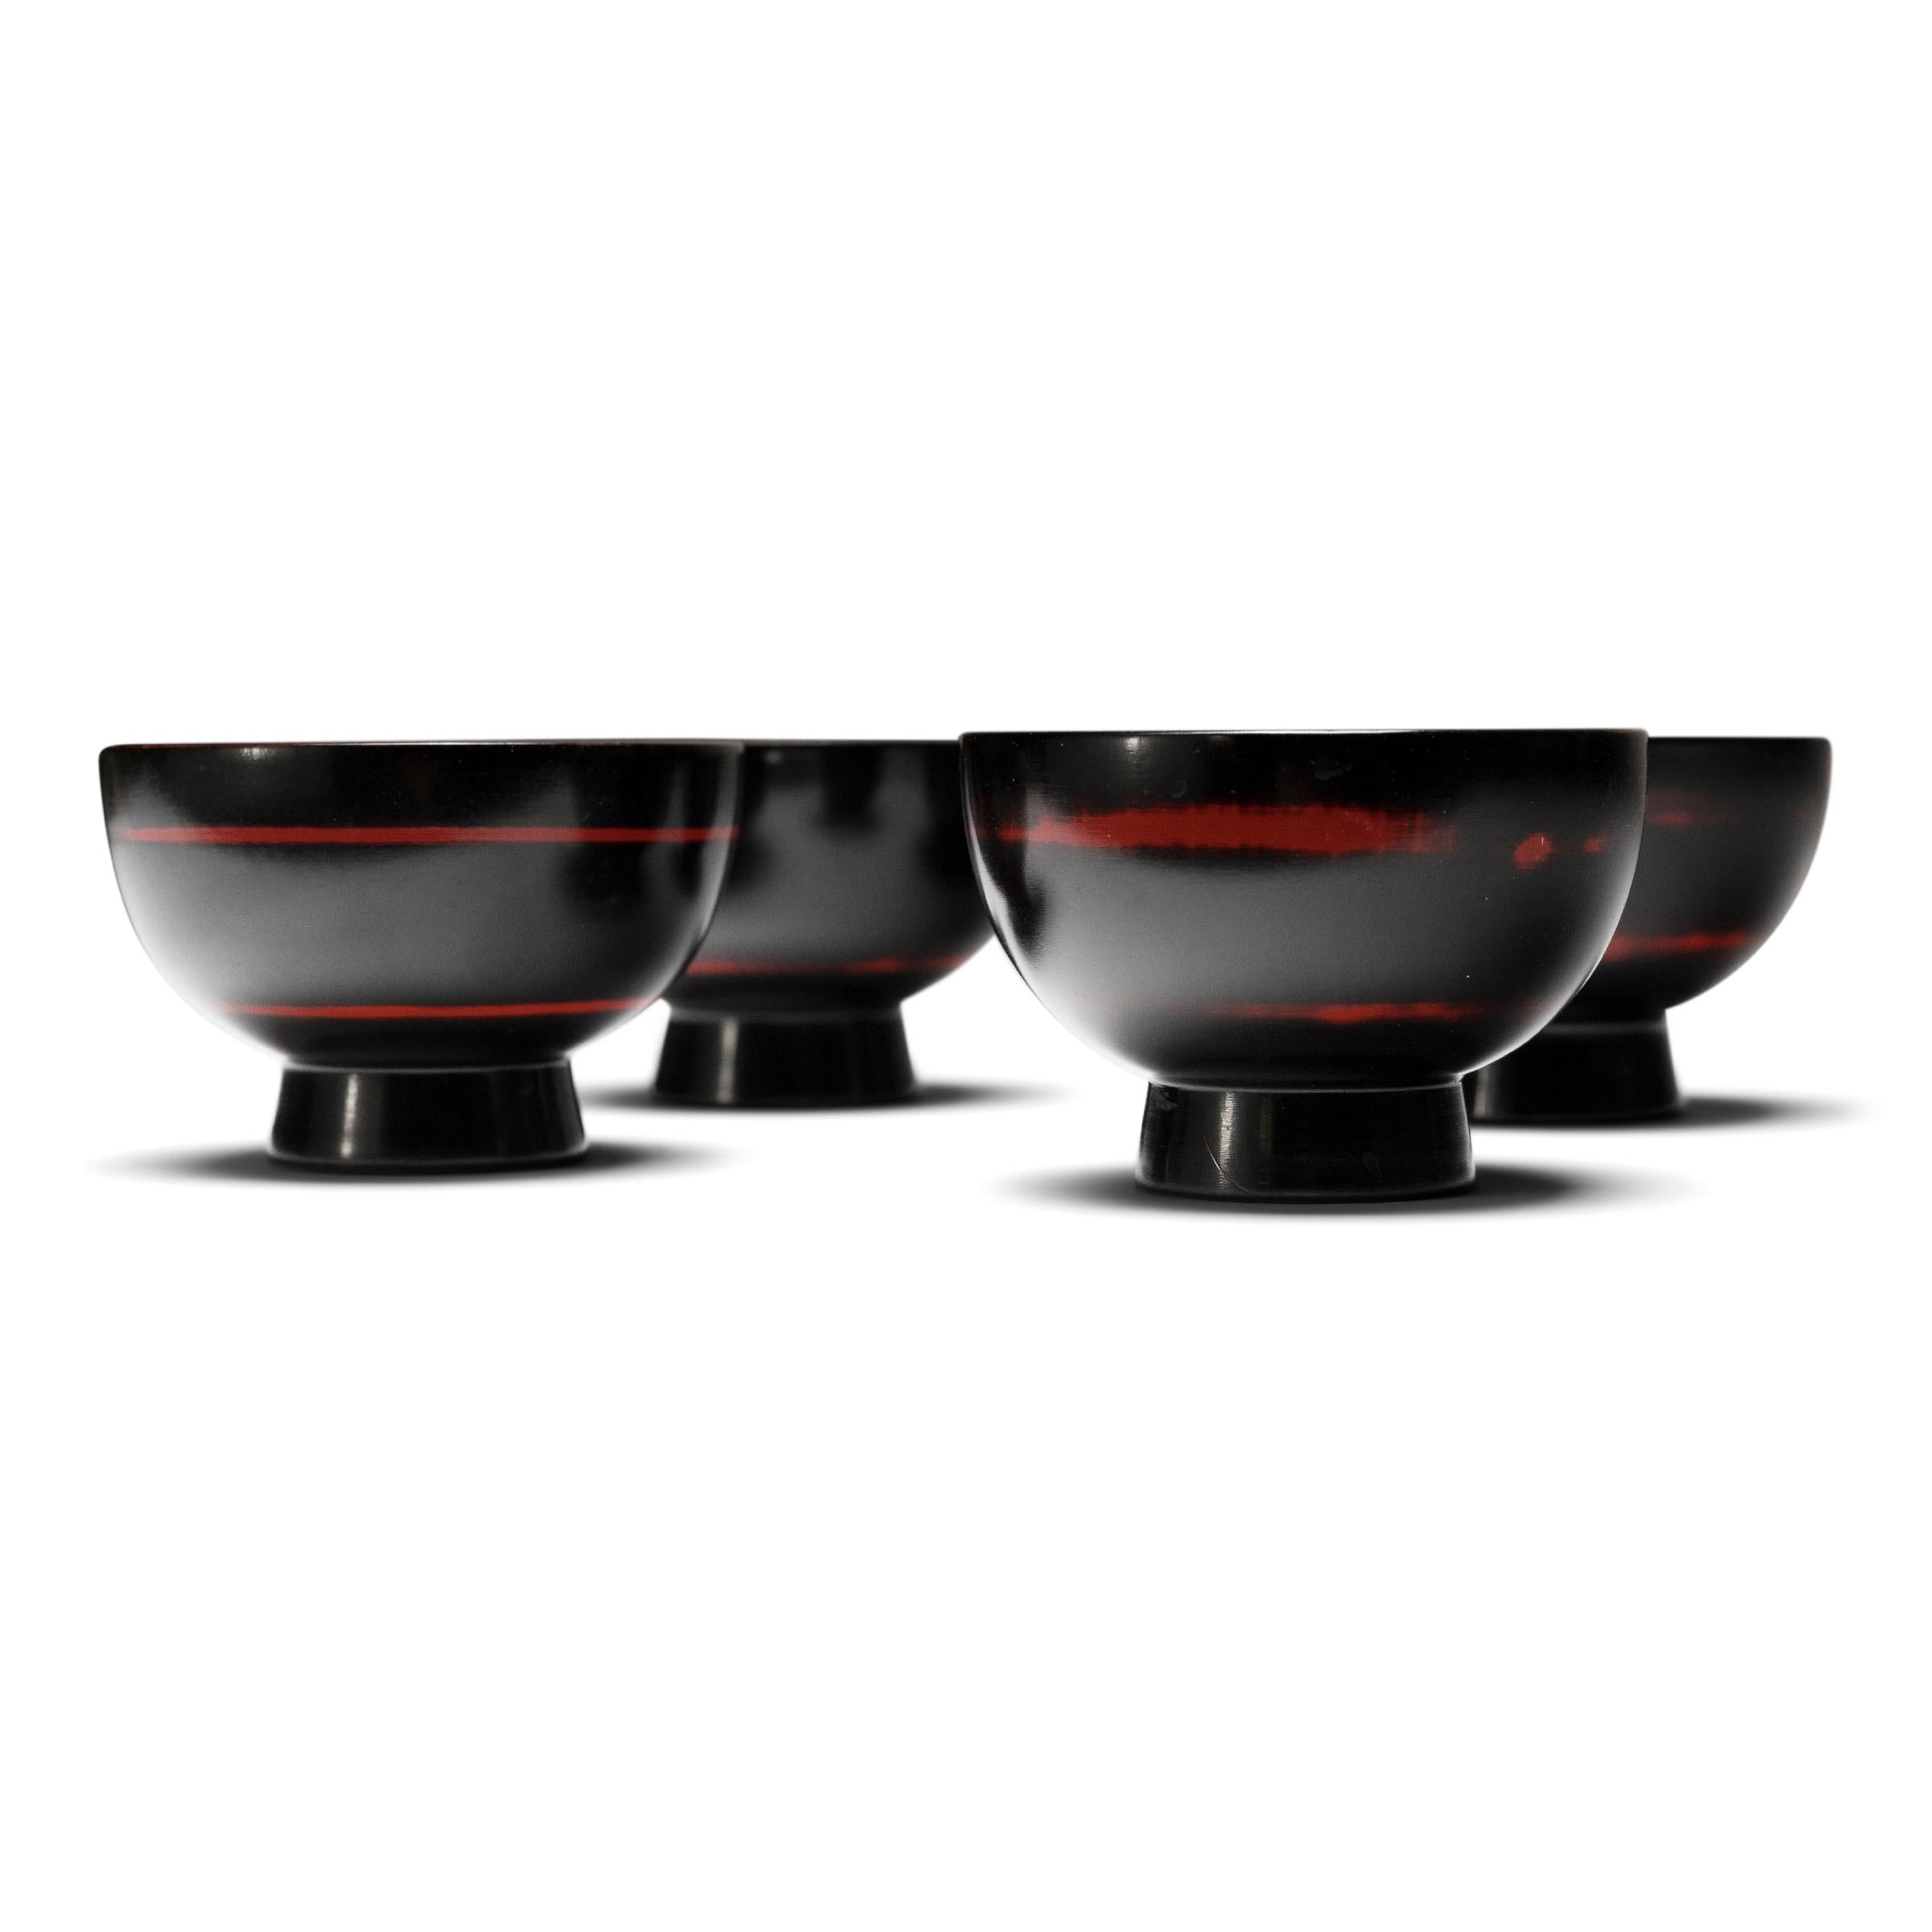 Other Set of Four Japanese Black Lacquer Bowls with Red Spiral